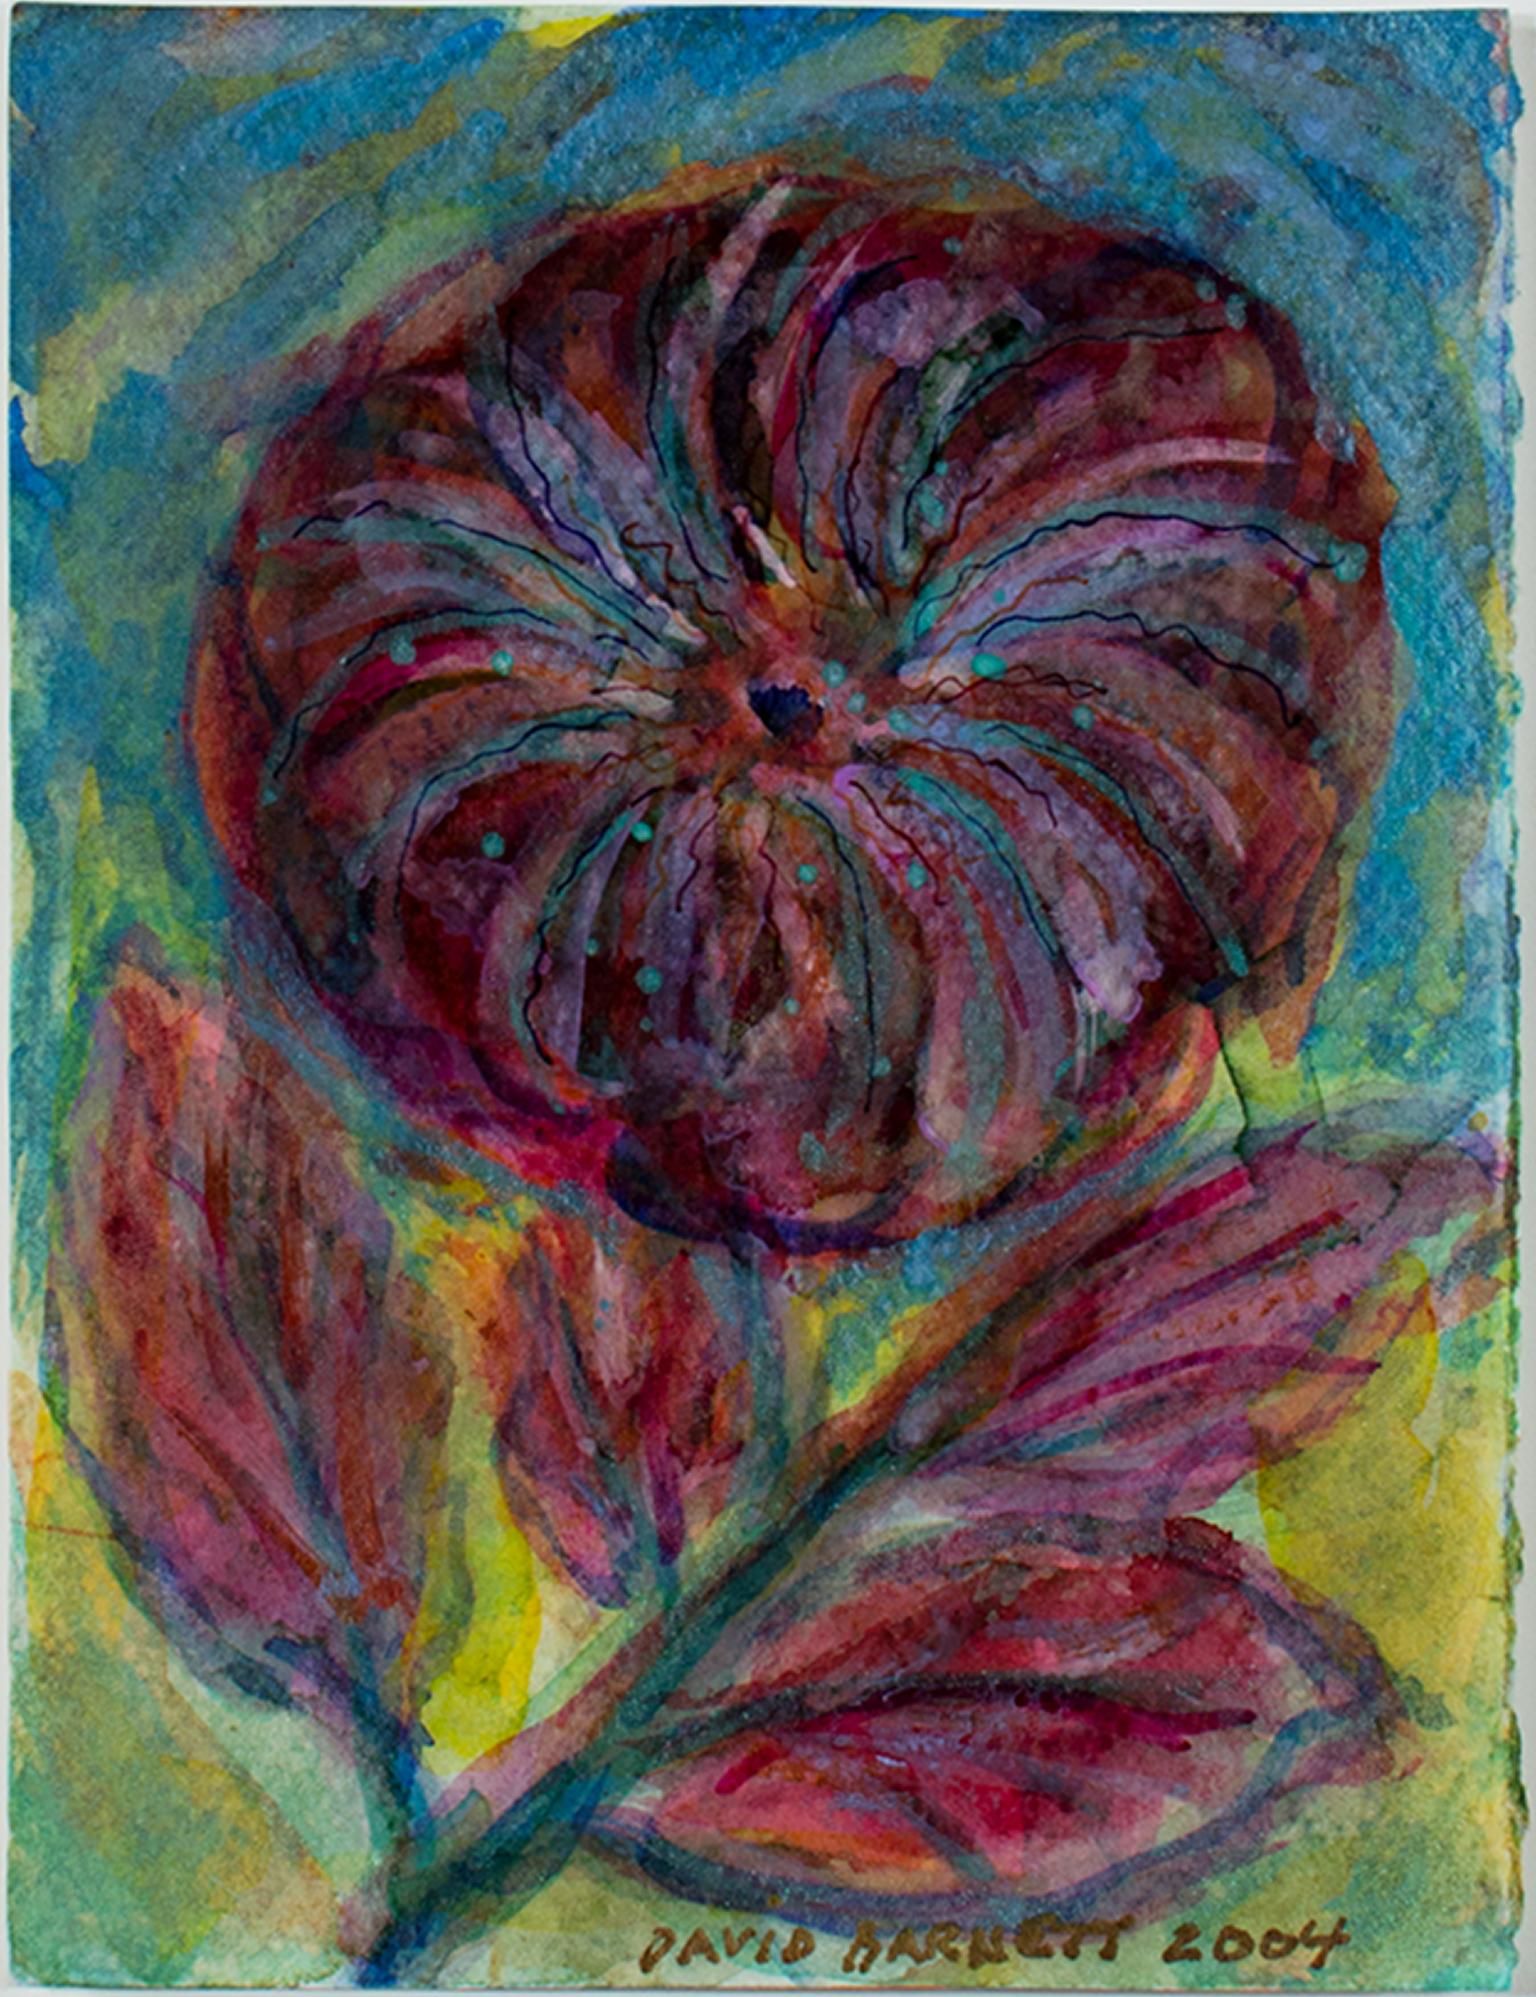 "Iridescent Fireworks Flower" is an original mixed media piece by David Barnett that incorporates iridescent acrylic, ink, and watercolor. It is signed in the lower center and framed with museum glass. A large, deep violet-red flower takes up the